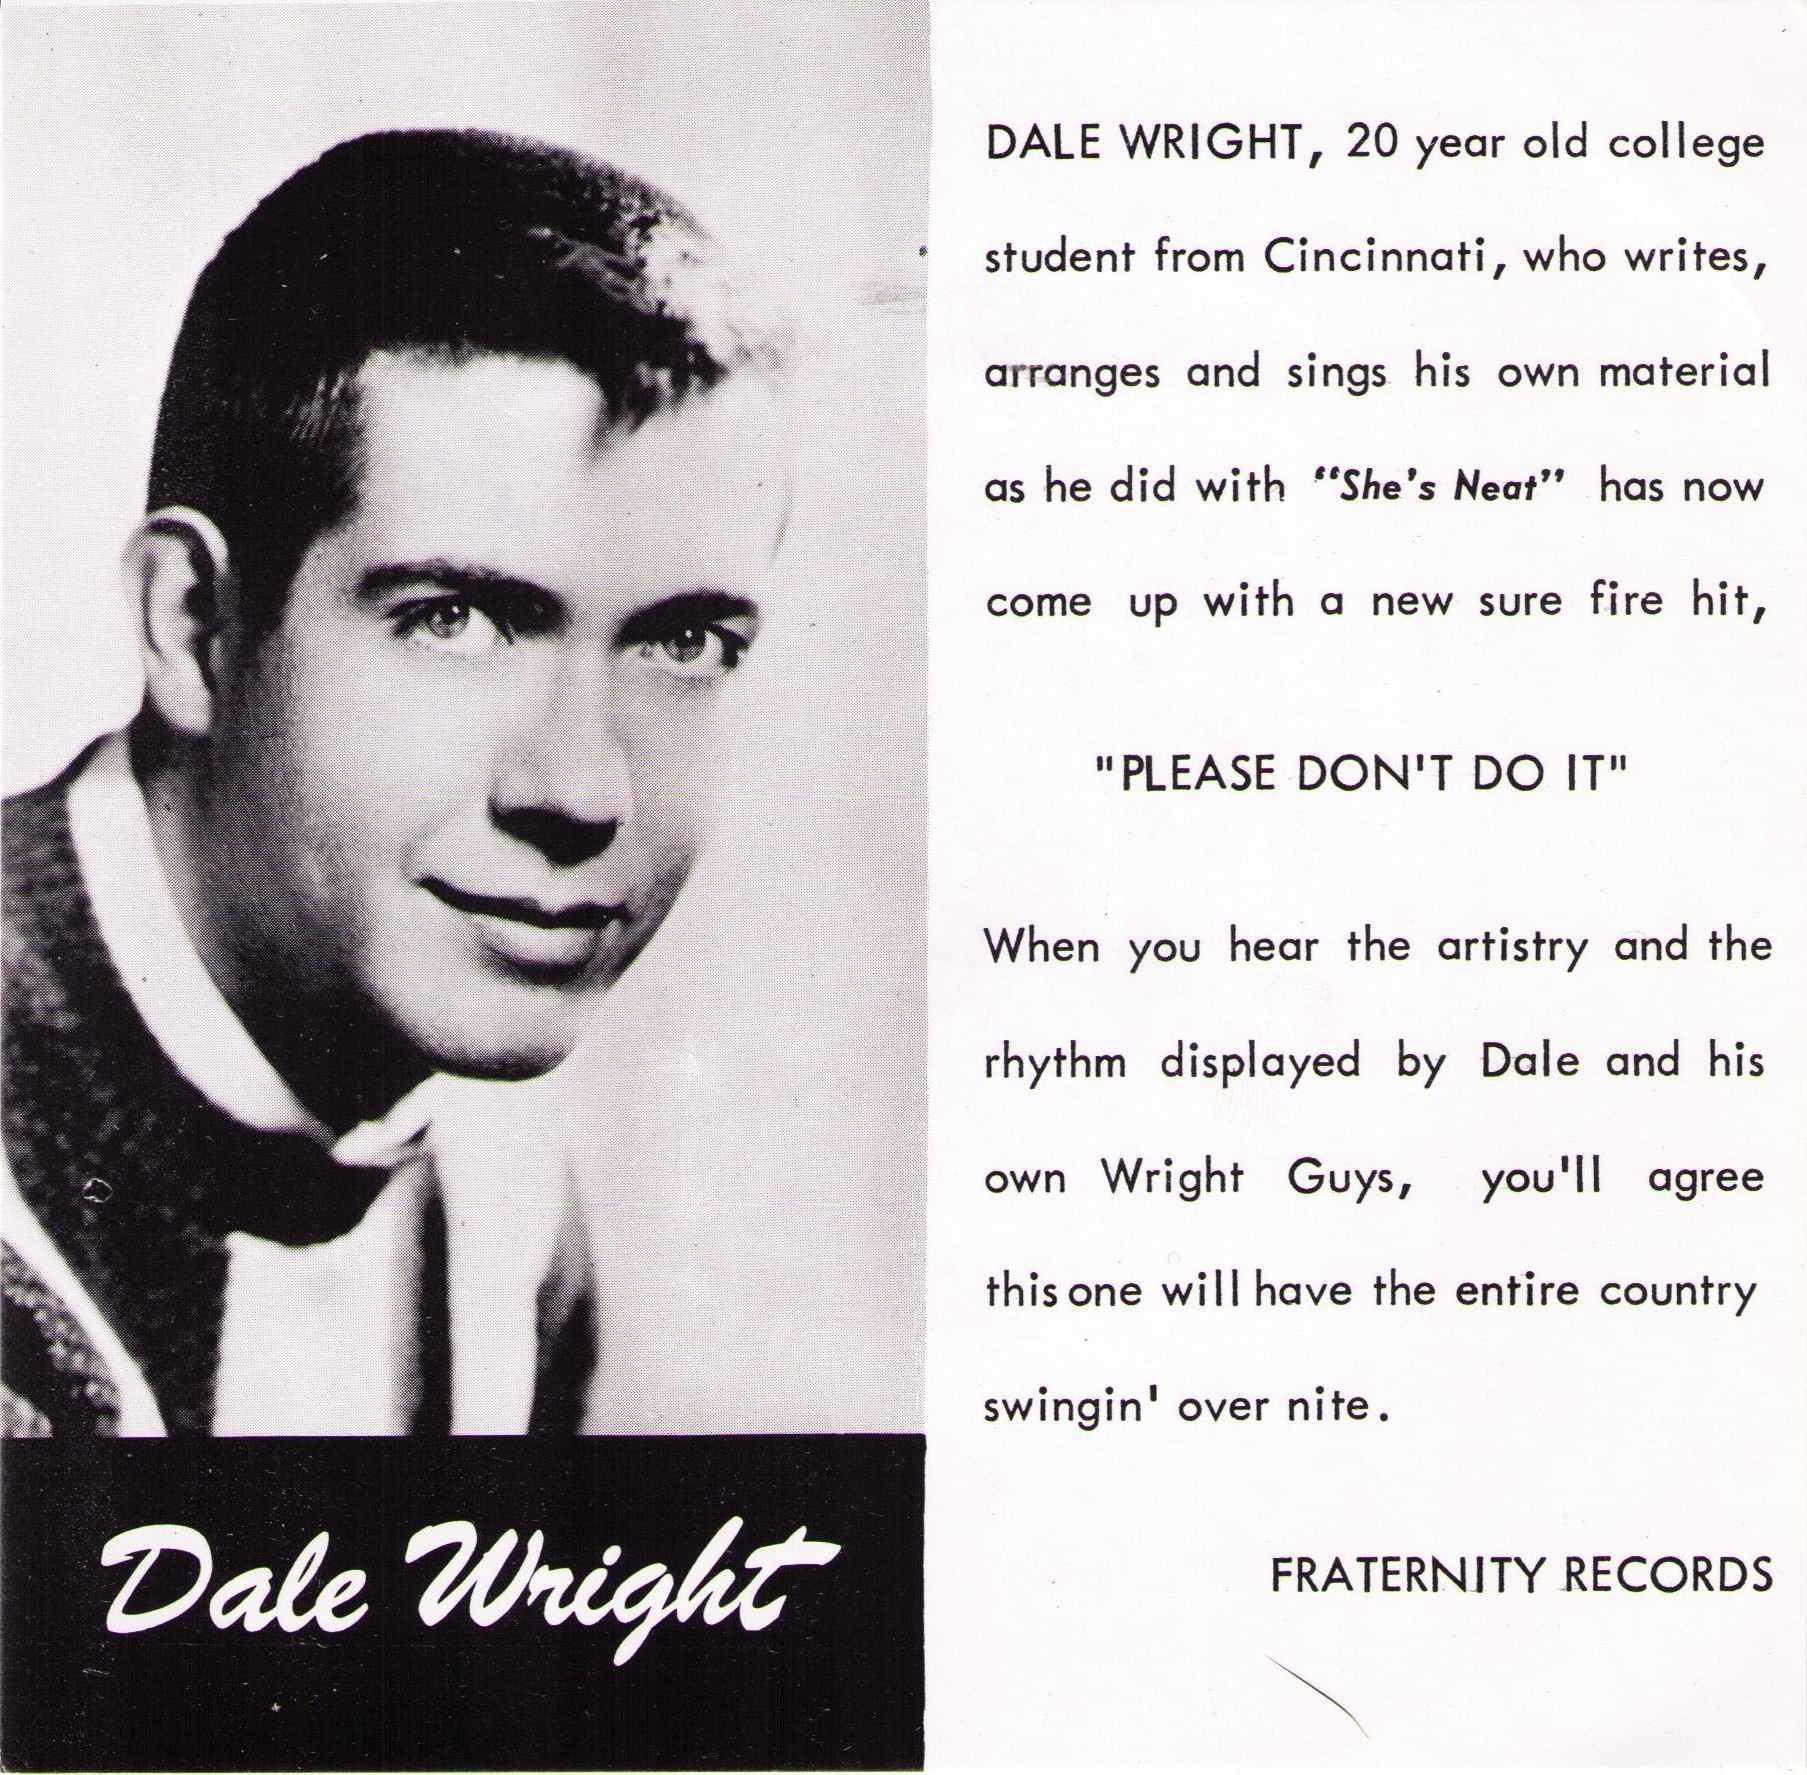 Dale Wright was one of the first Ohio rockers to score a national hit, although minor, with “She&#39;s Neat” on Fraternity. Dale started out in Middletown and ... - dalewright2